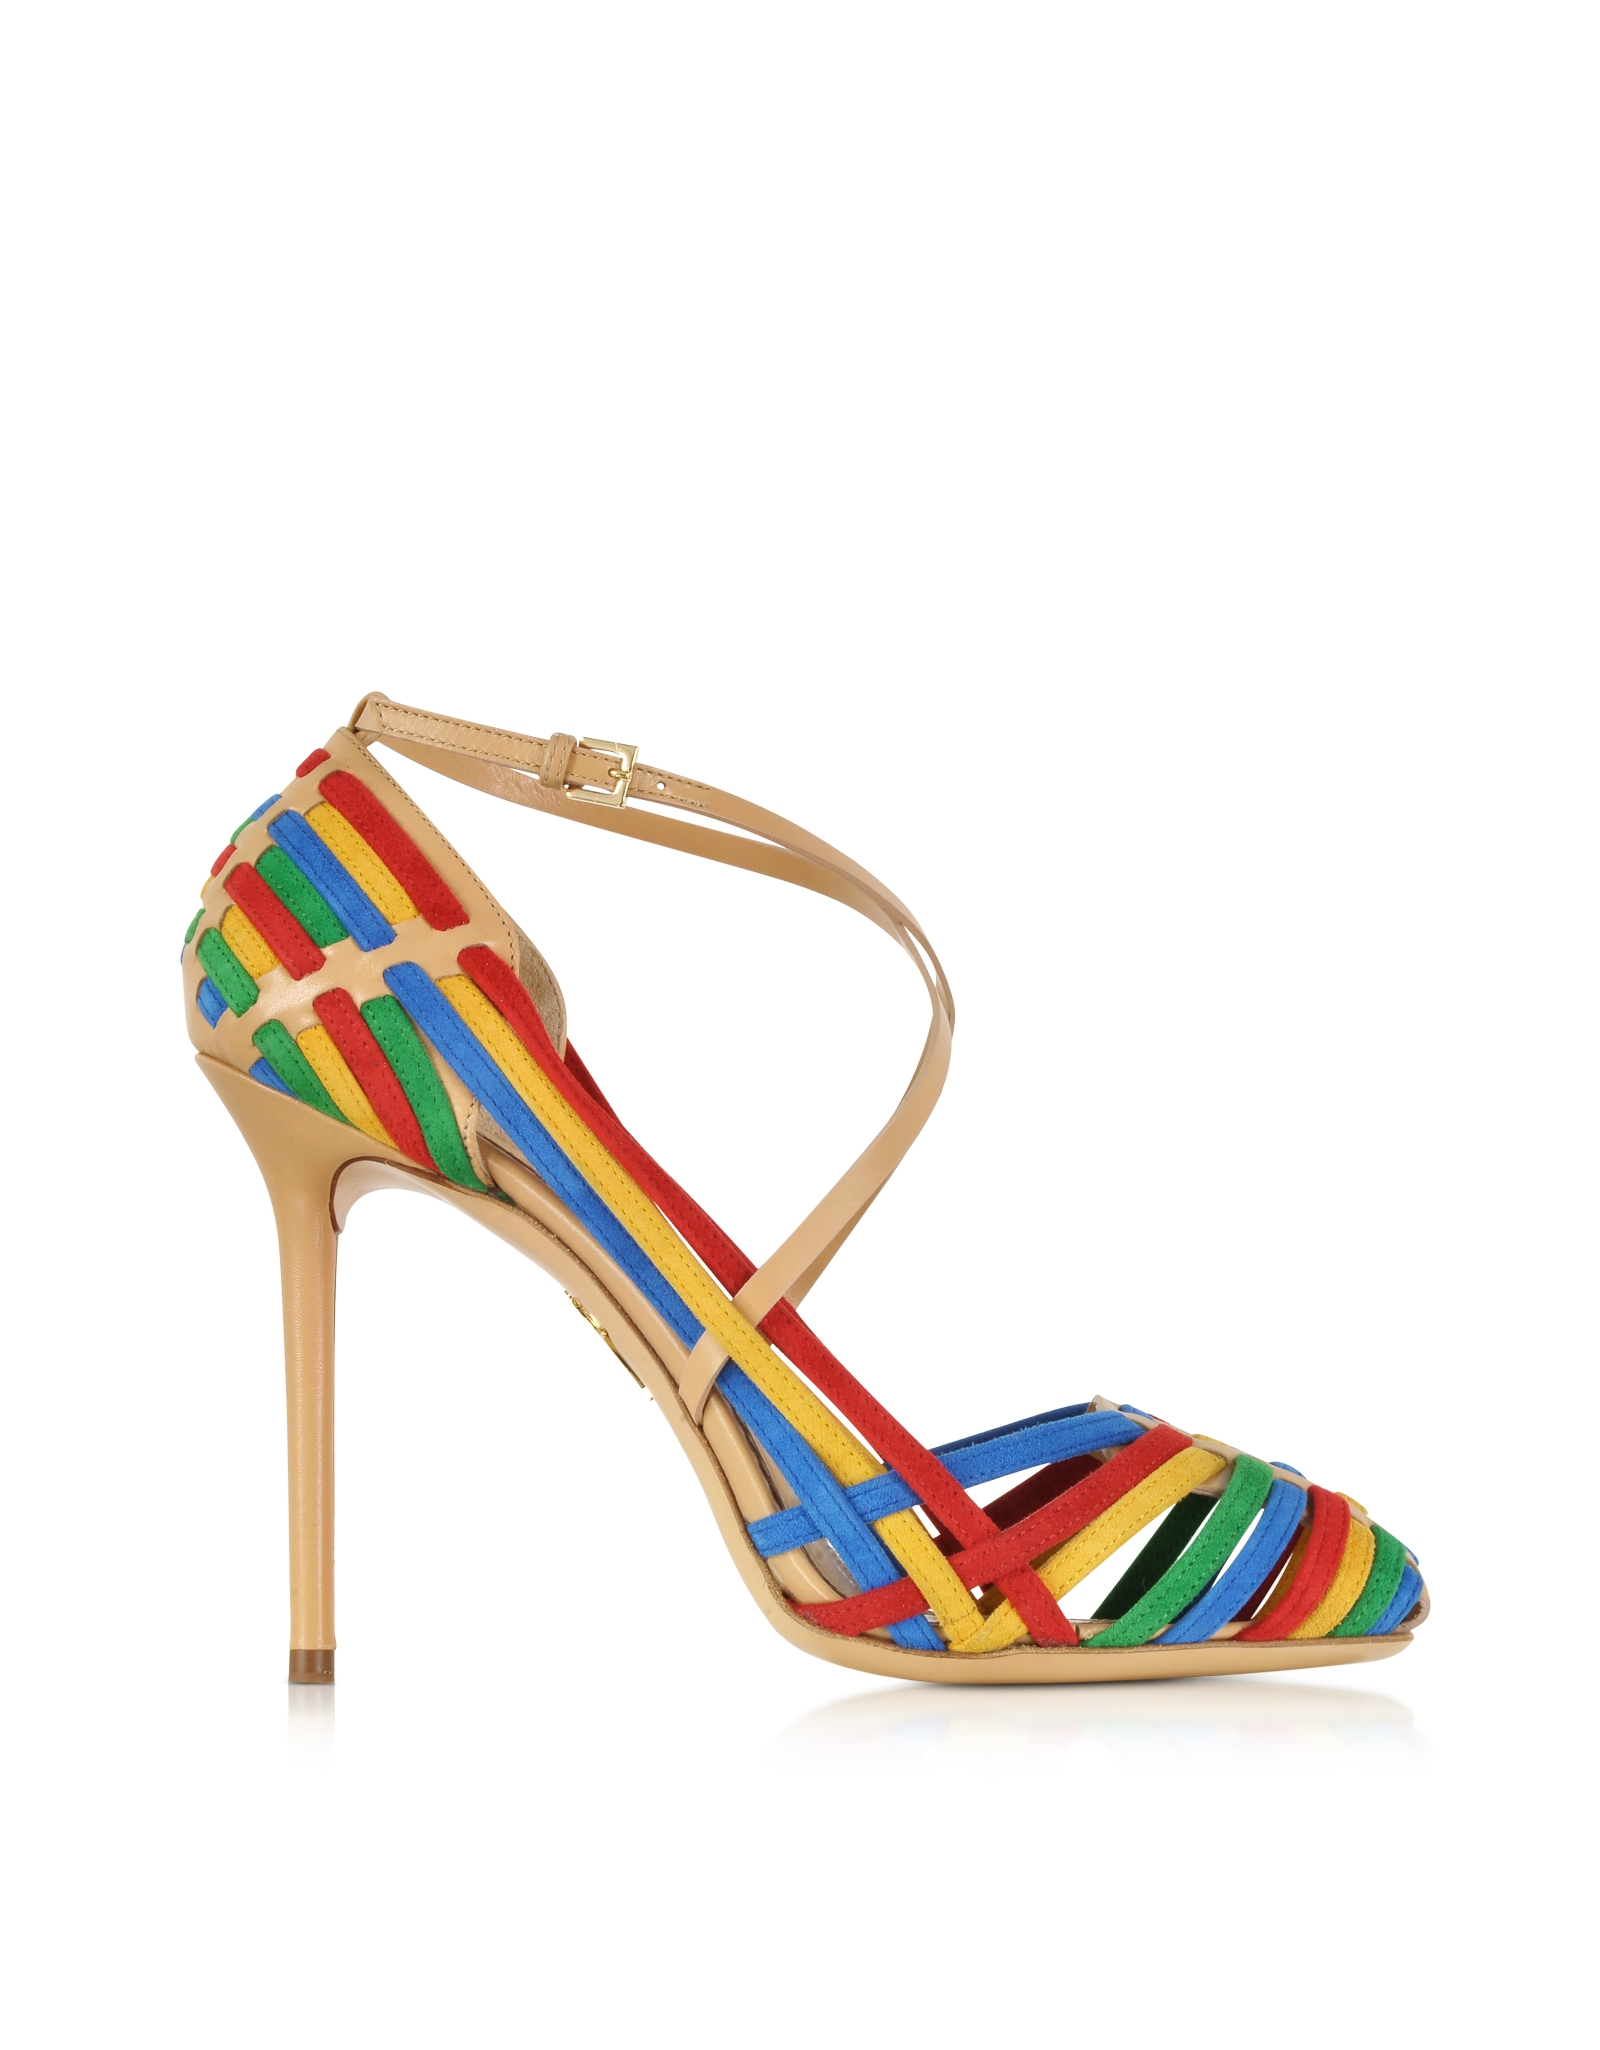 Lyst - Charlotte Olympia Mariachi Heels Multicolor Woven Leather And ...